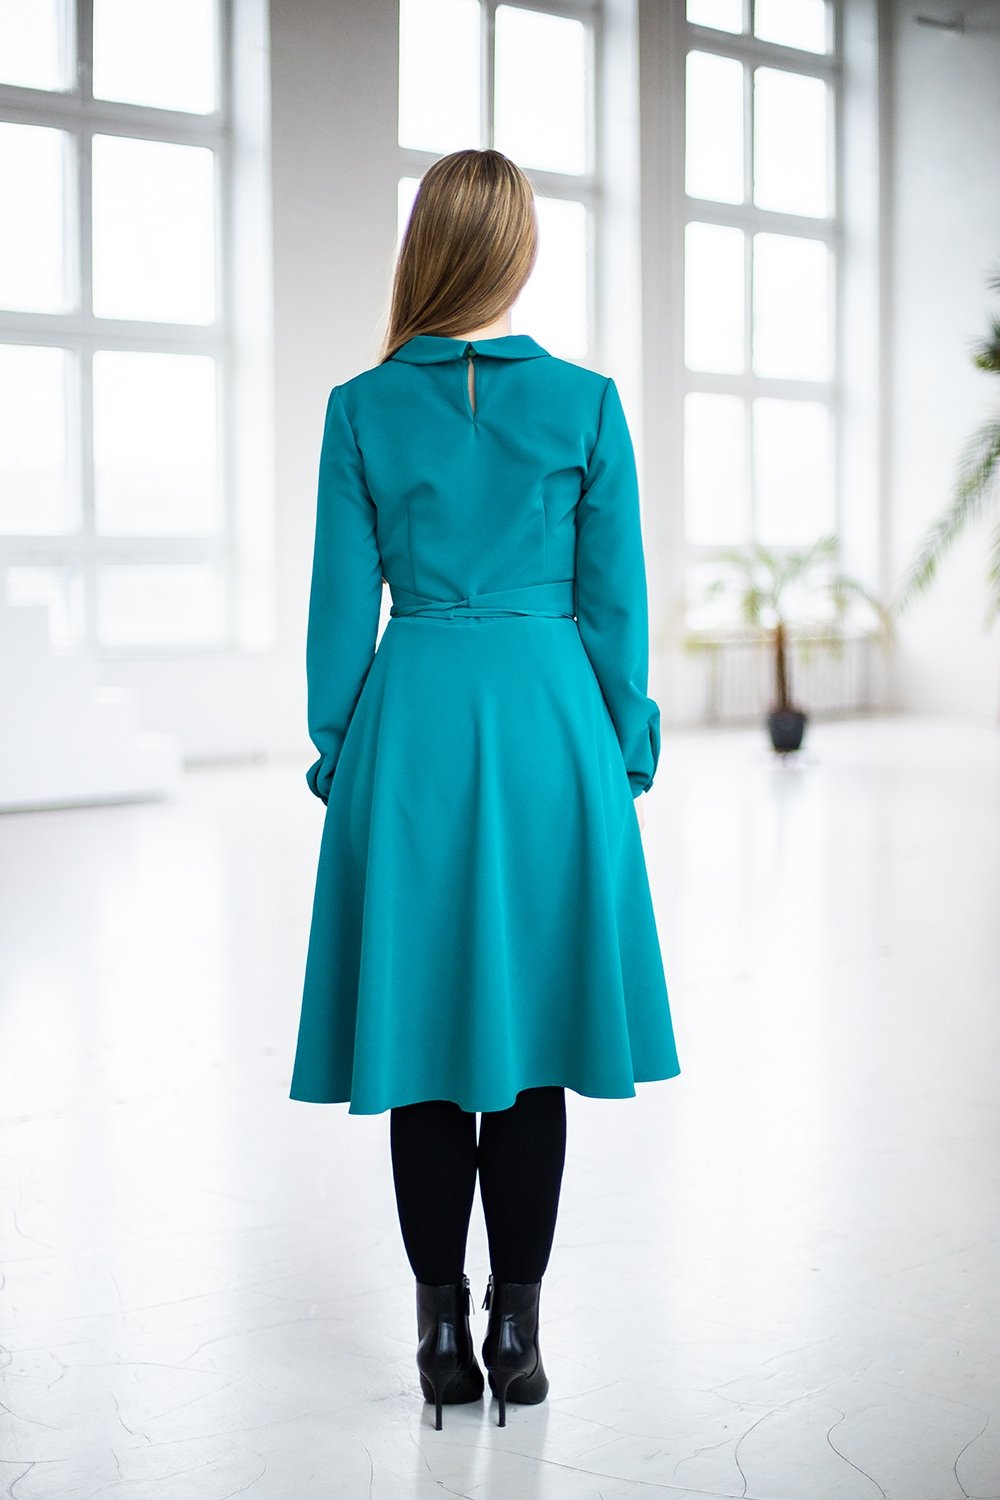 Green dress with collar